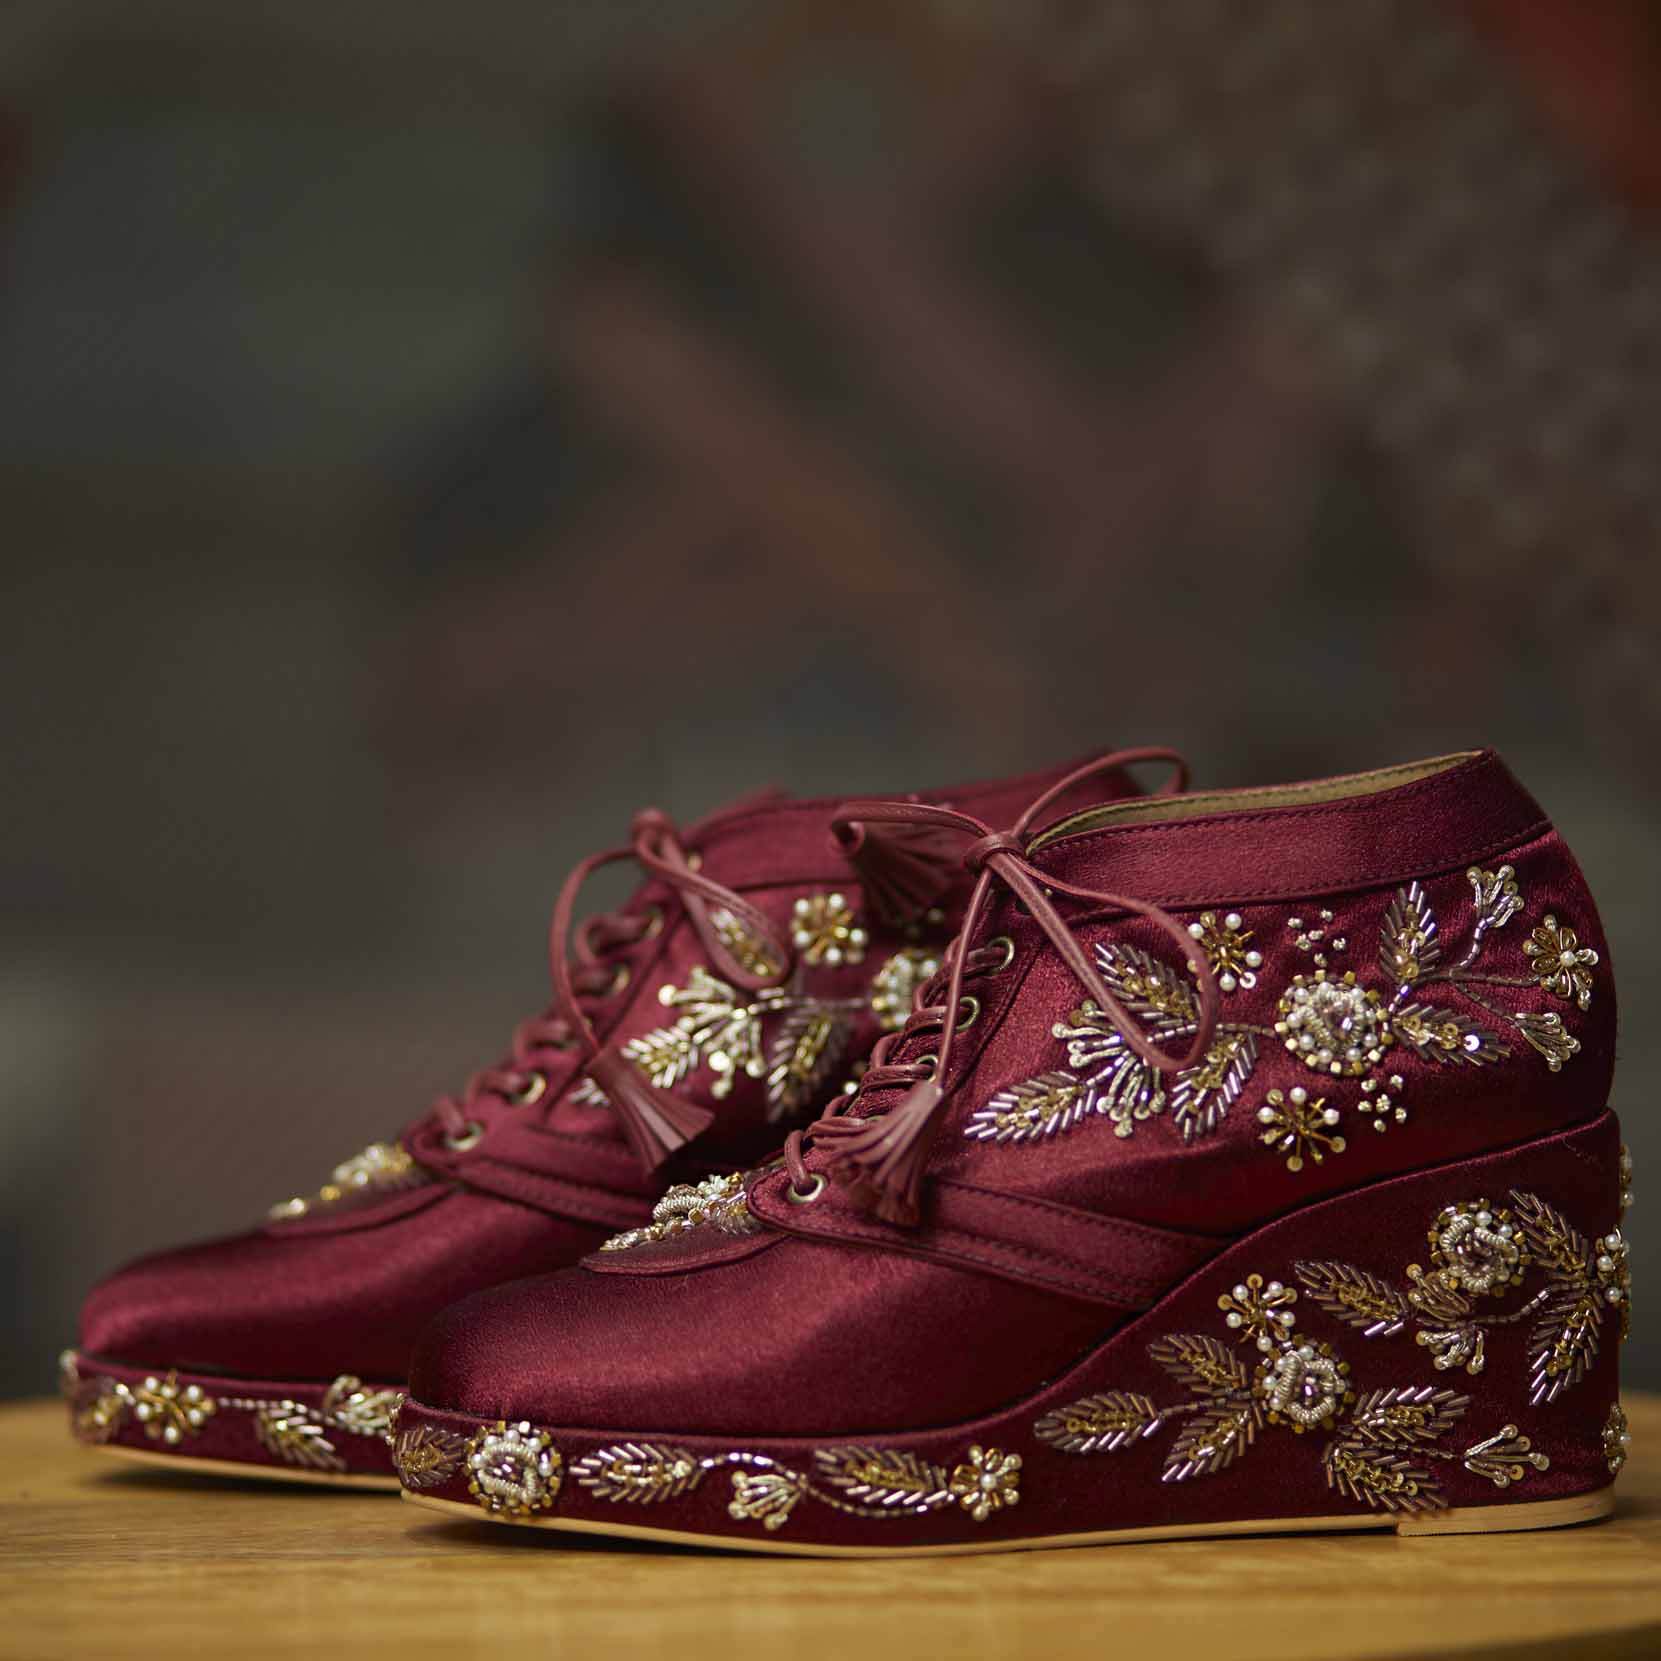 Maroon Satin Embroidered Bridal Sneaker Wedges - Customized Wedding Shoes | Tiesta